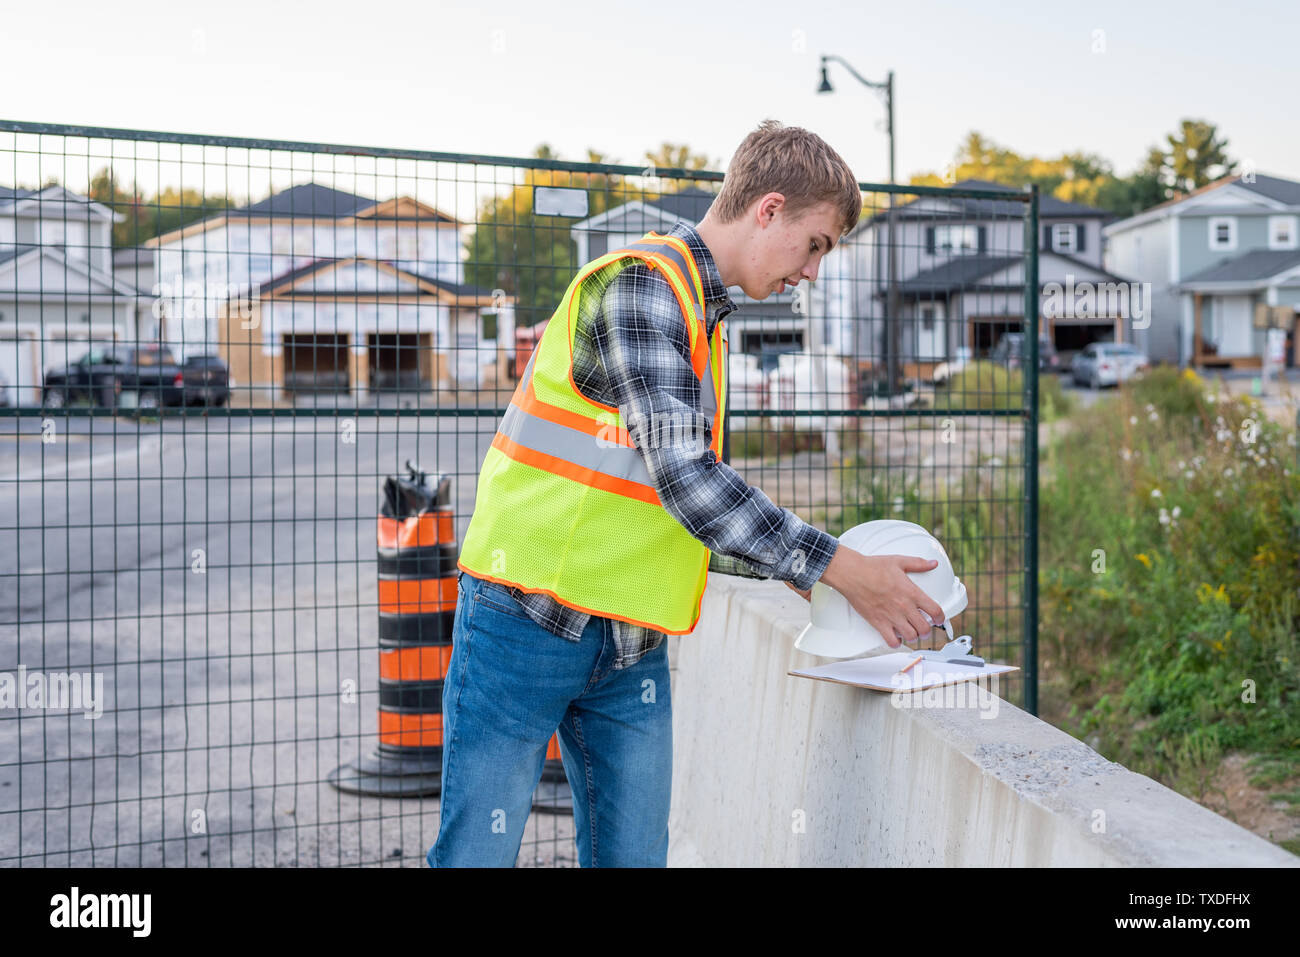 Young construction worker putting on his safety gear at a job site. Stock Photo